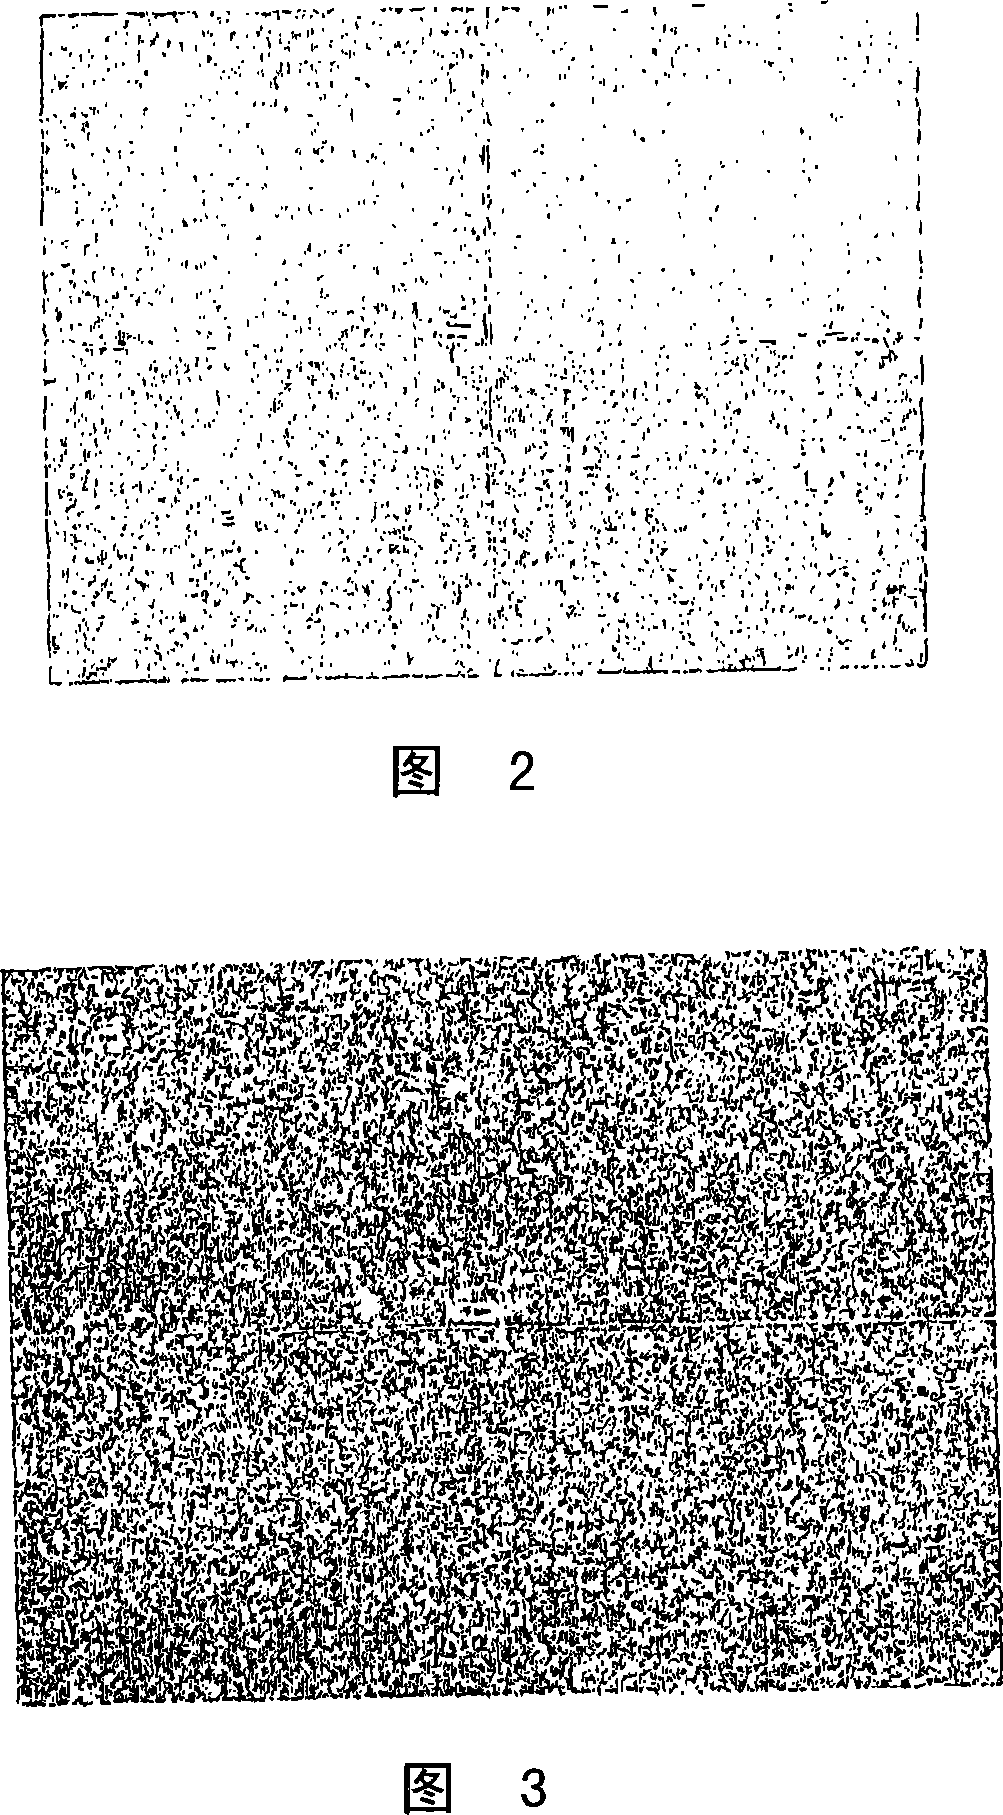 Injectable compositions of nanoparticulate immunosuppressive compounds